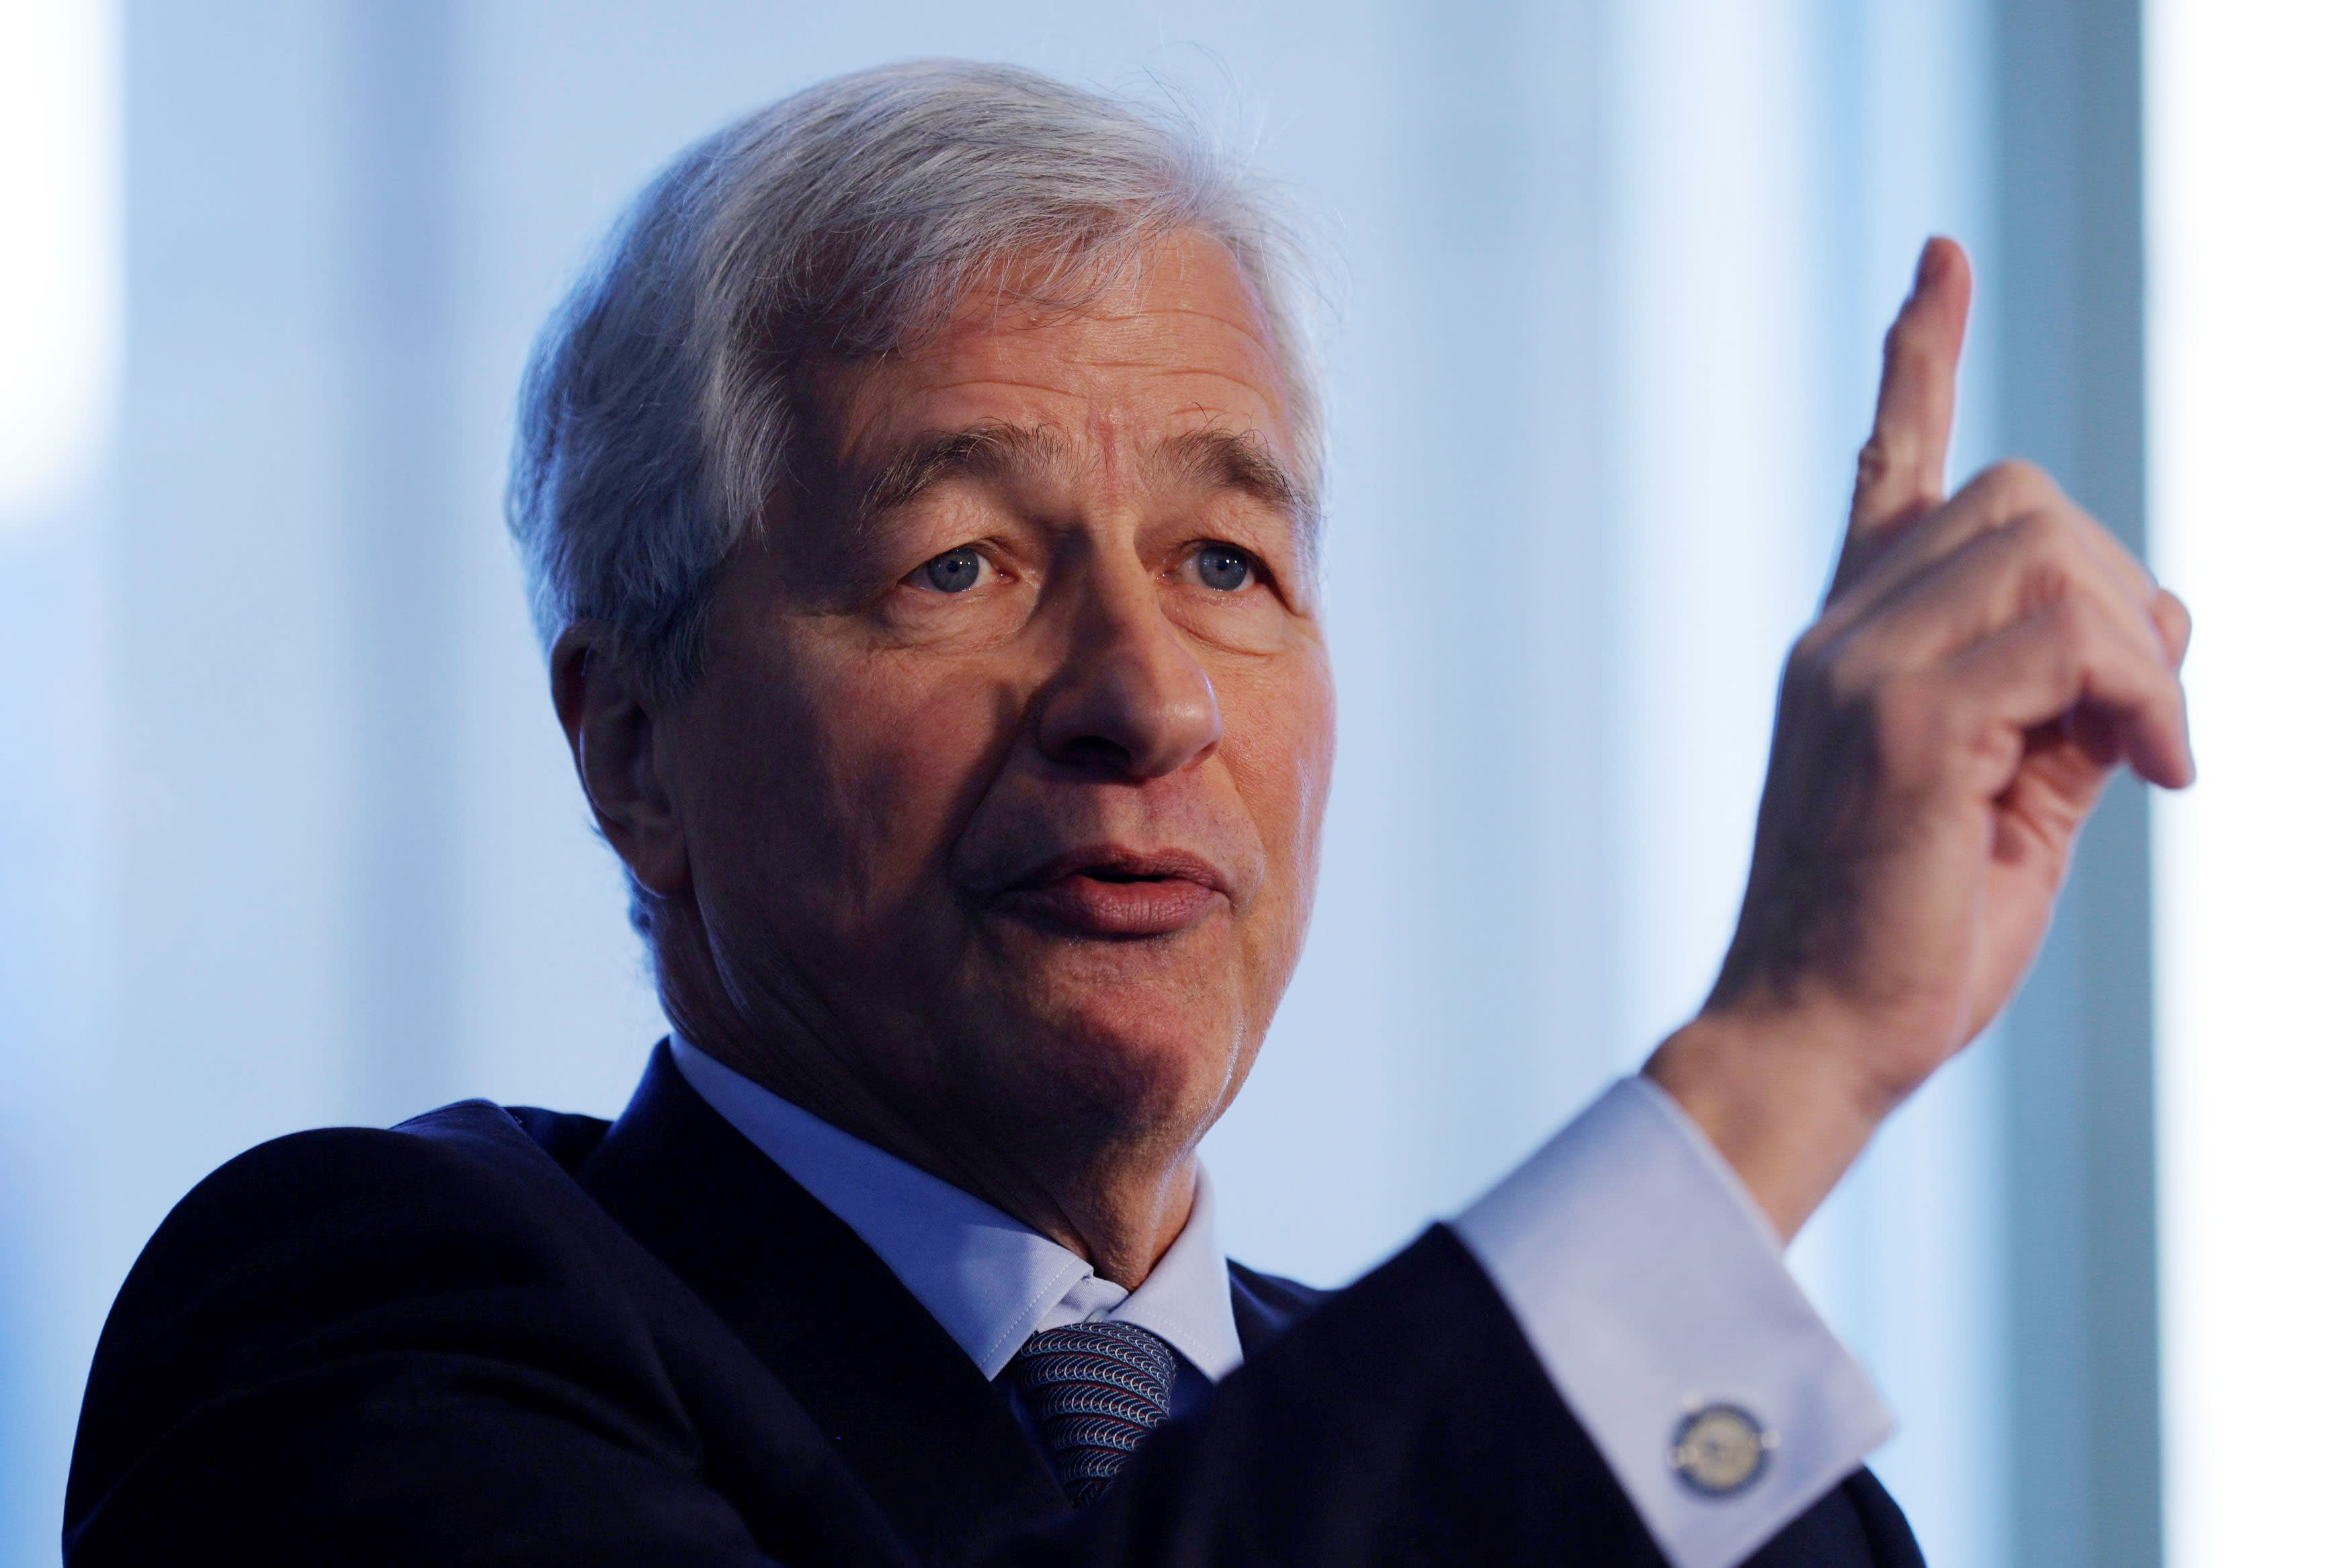 Picture - Wage inflation has arrived in a big way and Jamie Dimon says CEOs 'shouldn't be crybabies about it'